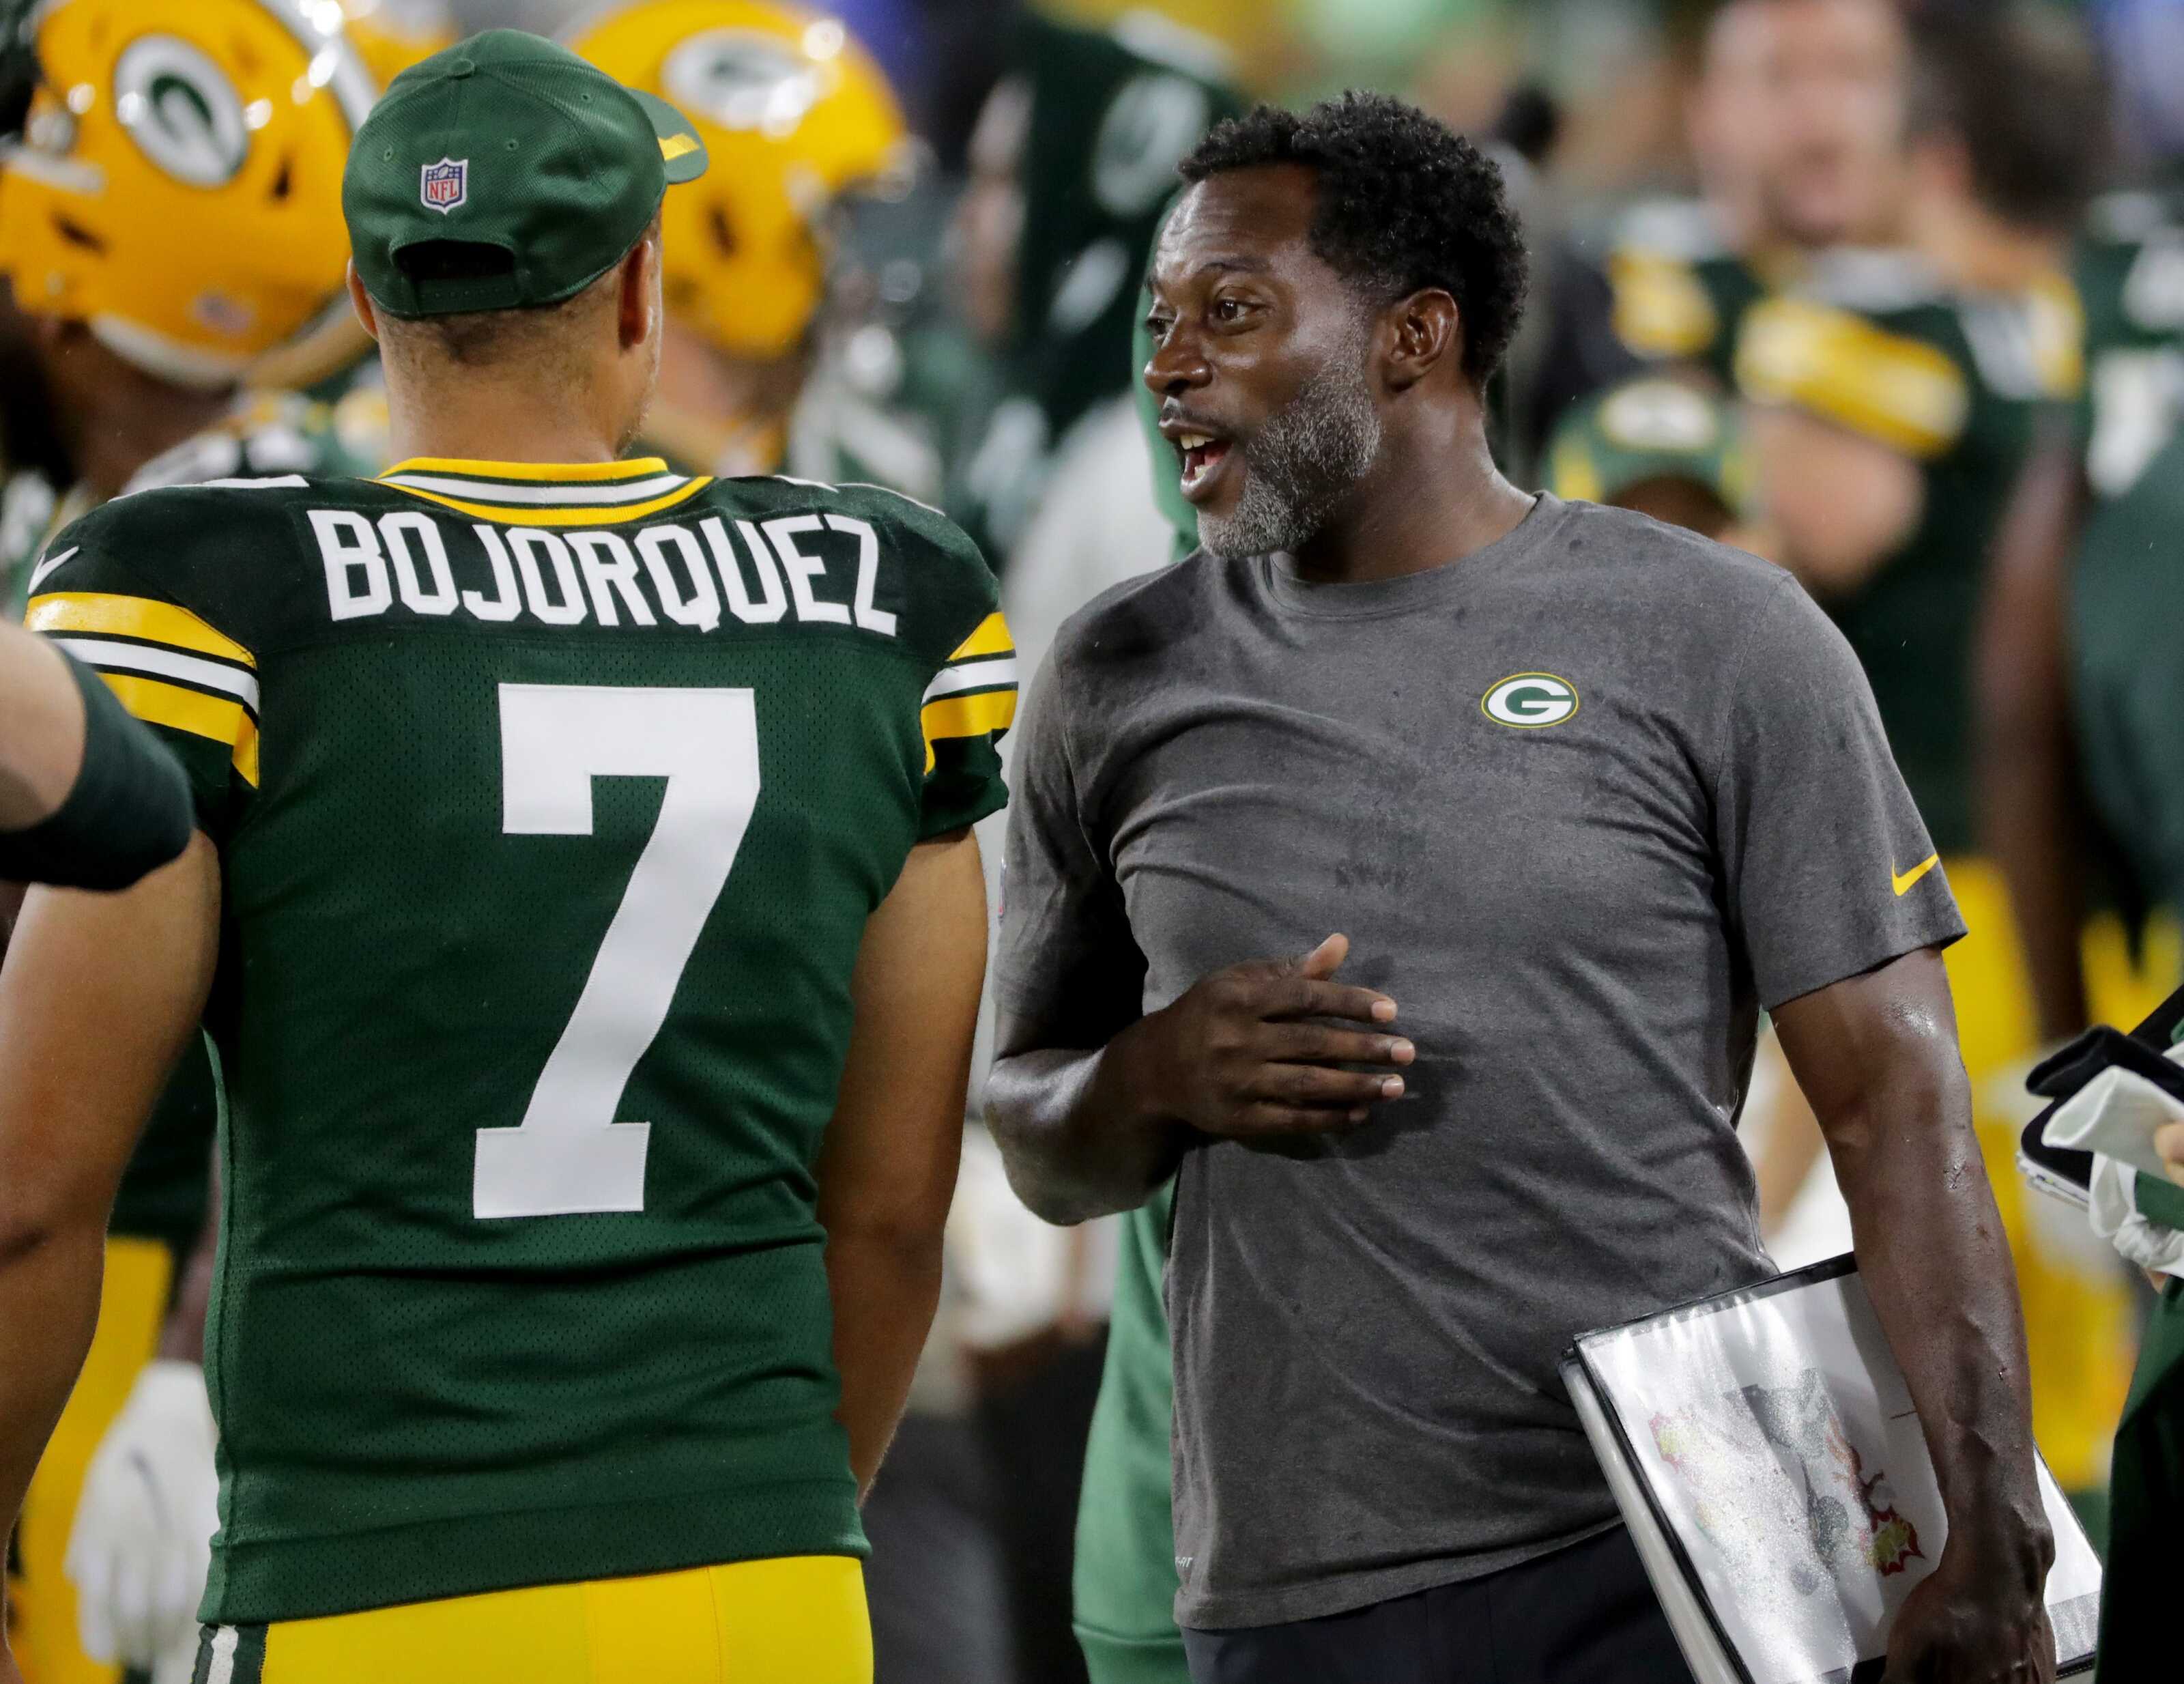 No Surprise, Green Bay Packers Special Teams Ranked Worst in NFL